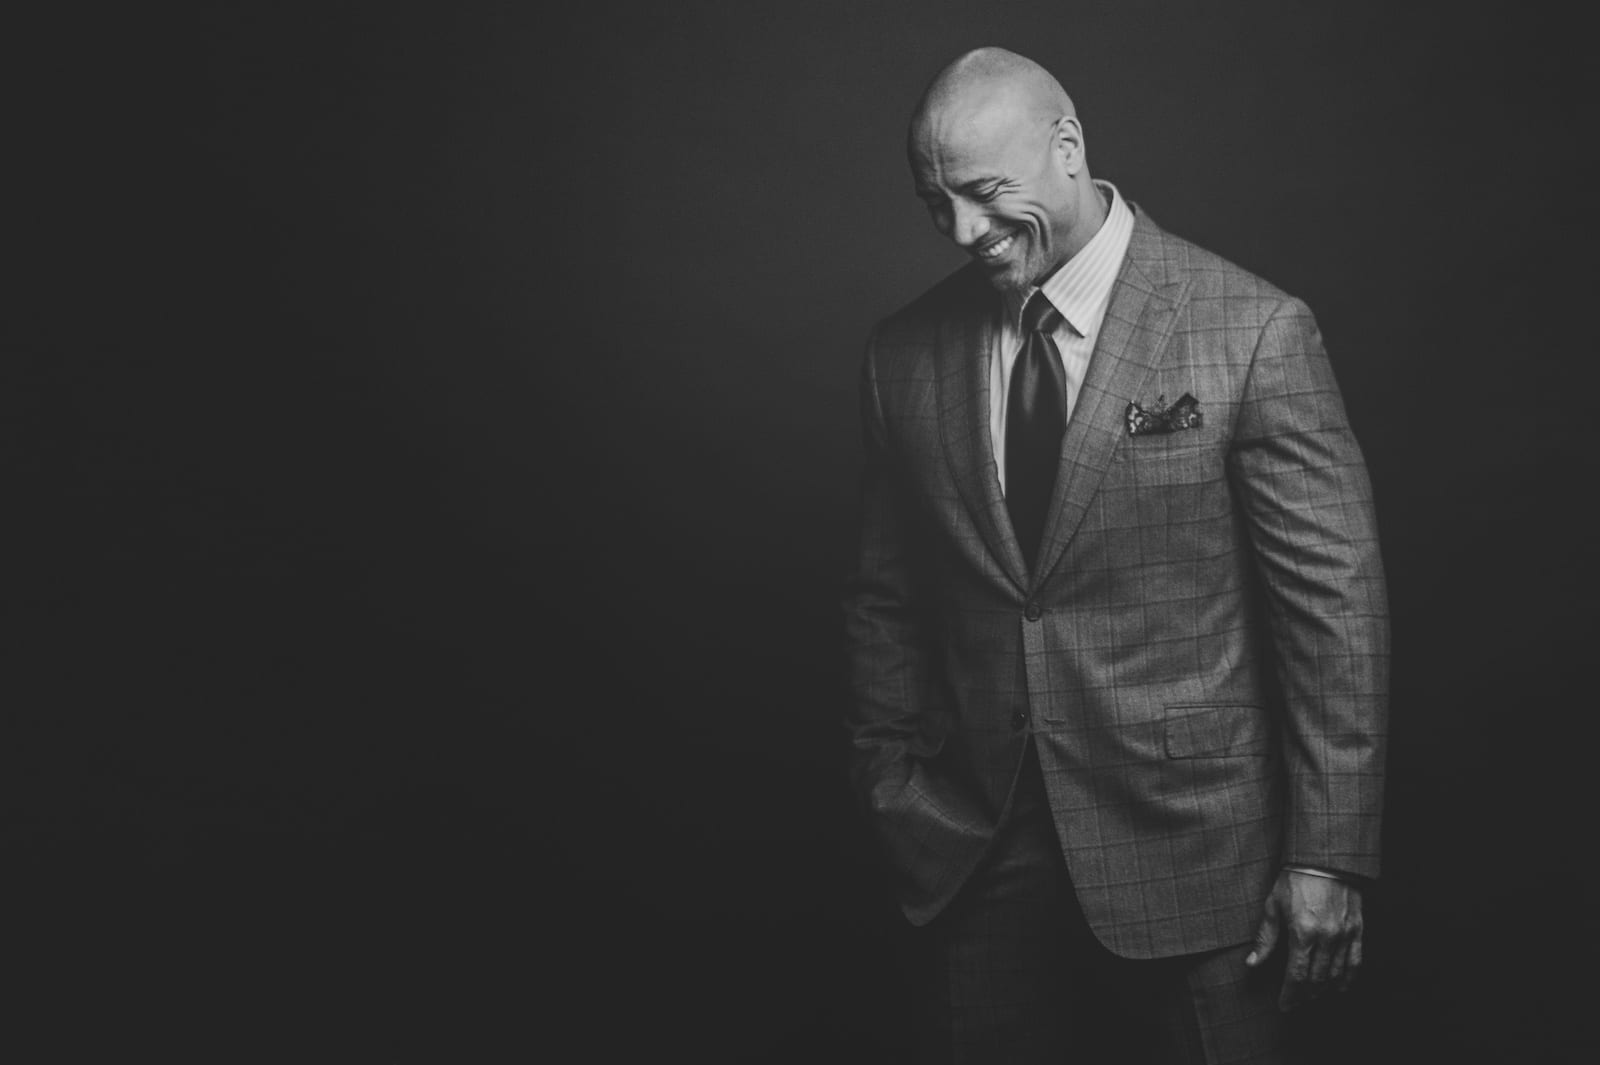 Black and white of Dwayne "The Rock" Johnson with Fortune Magazine posing for camera looking down and smiling